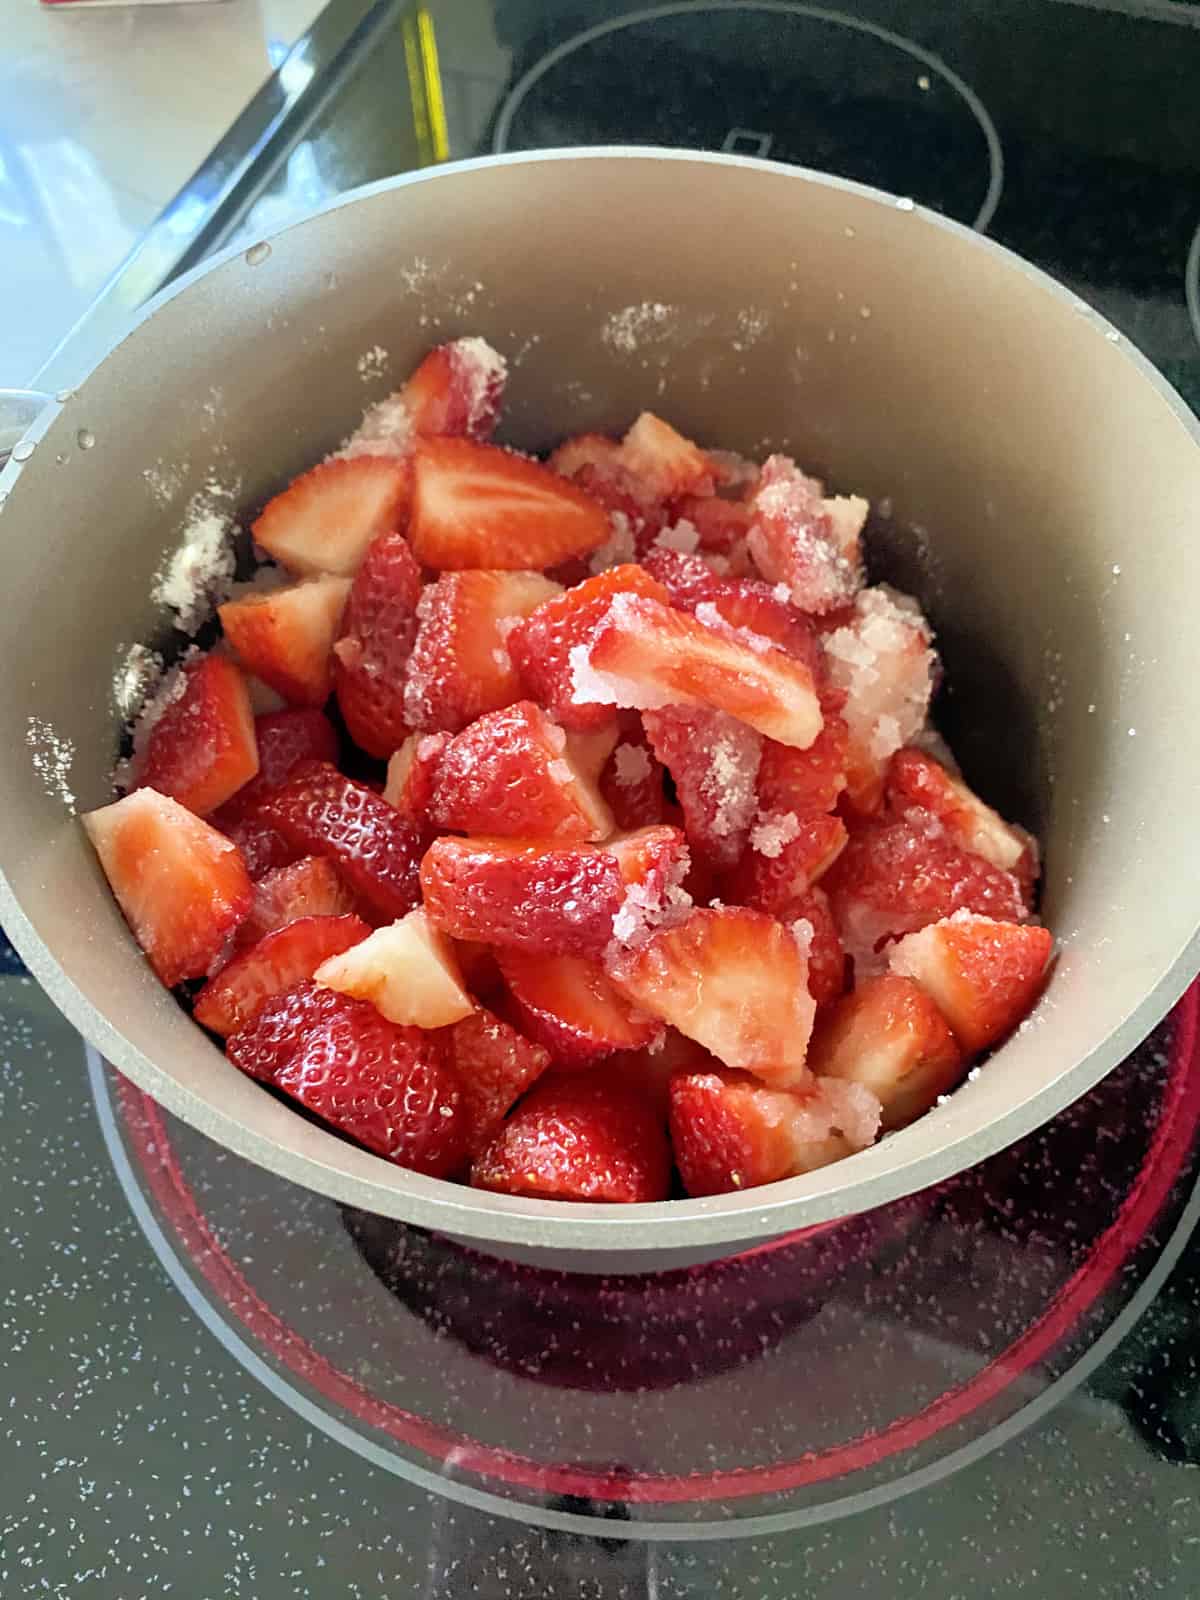 Sauce pot of strawberries mixed with sugar in a sauce pot.